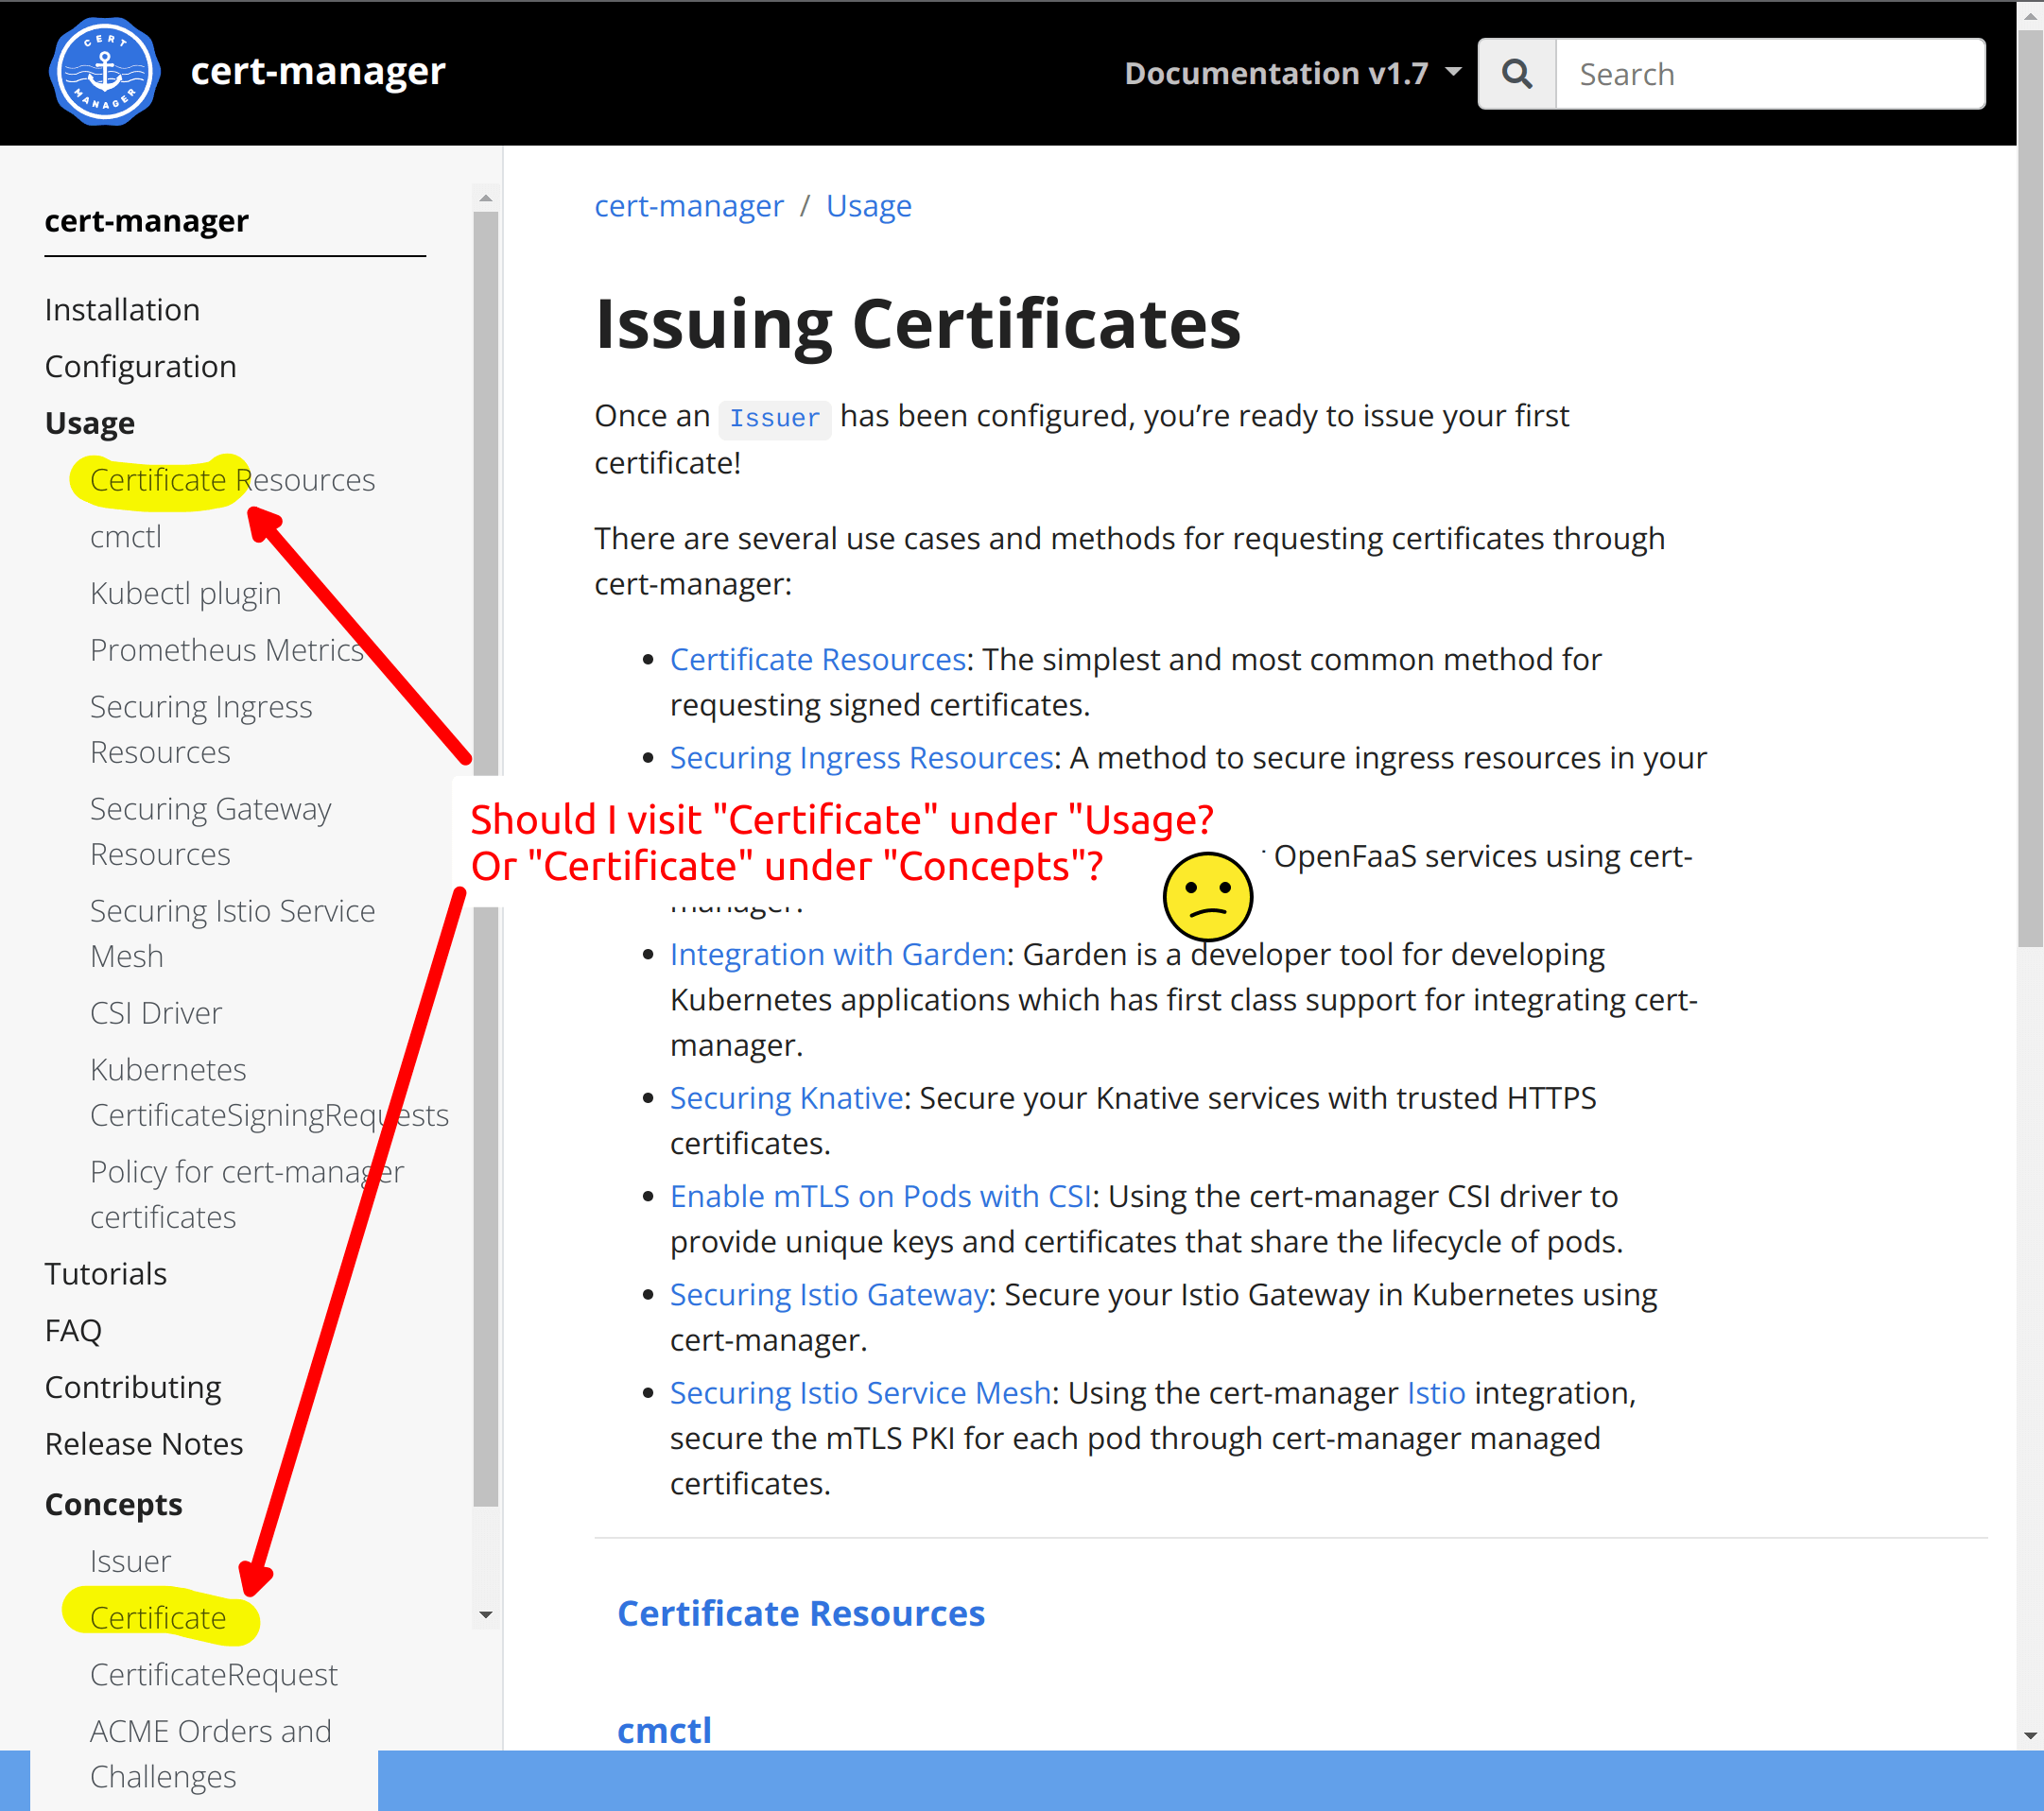 Screenshot of the cert-manager.io website with Usage and Concepts visible in the menu